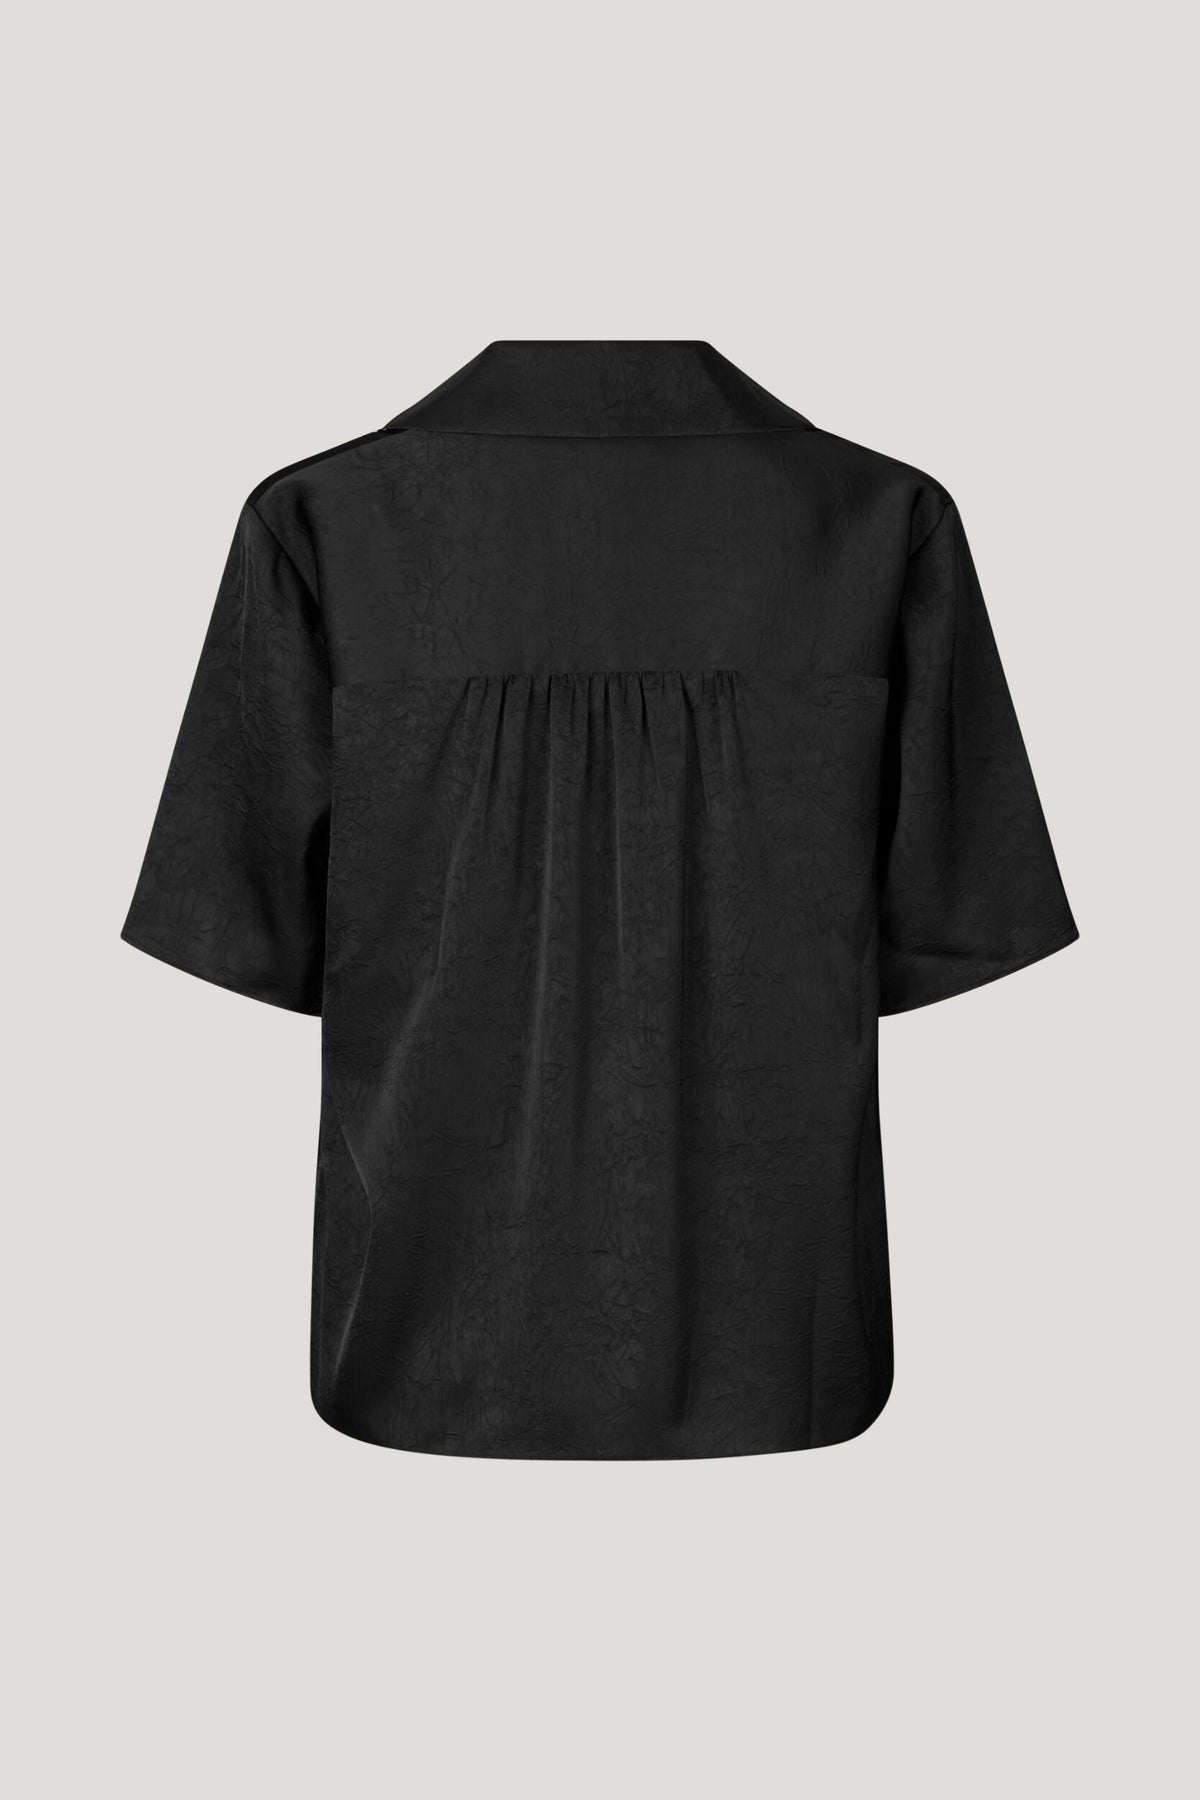 Black crinkle effect fabric top with V neck line and a tie at the neck short sleeves